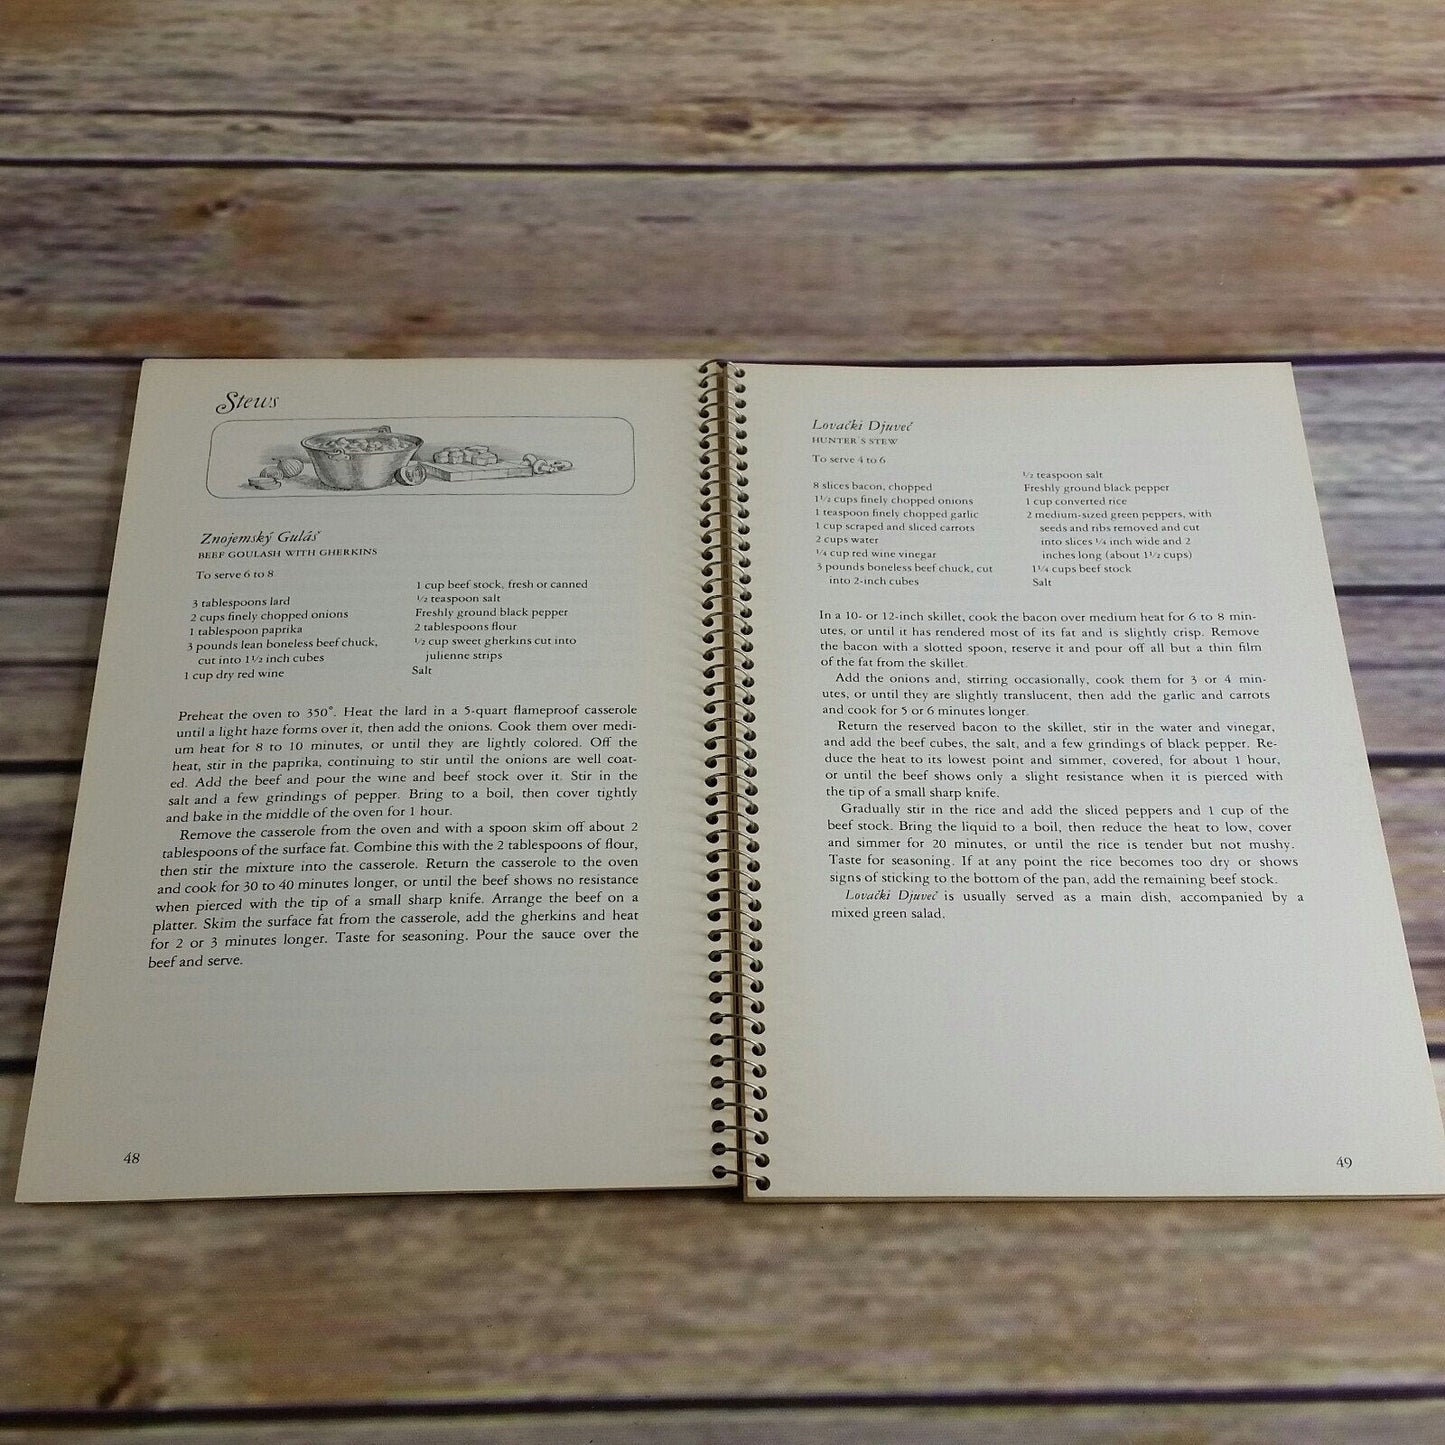 Vtg Austrian Cookbook The Cooking of Viennas Empire Time Life Books Foods of the World 1968 Spiral Bound Austria